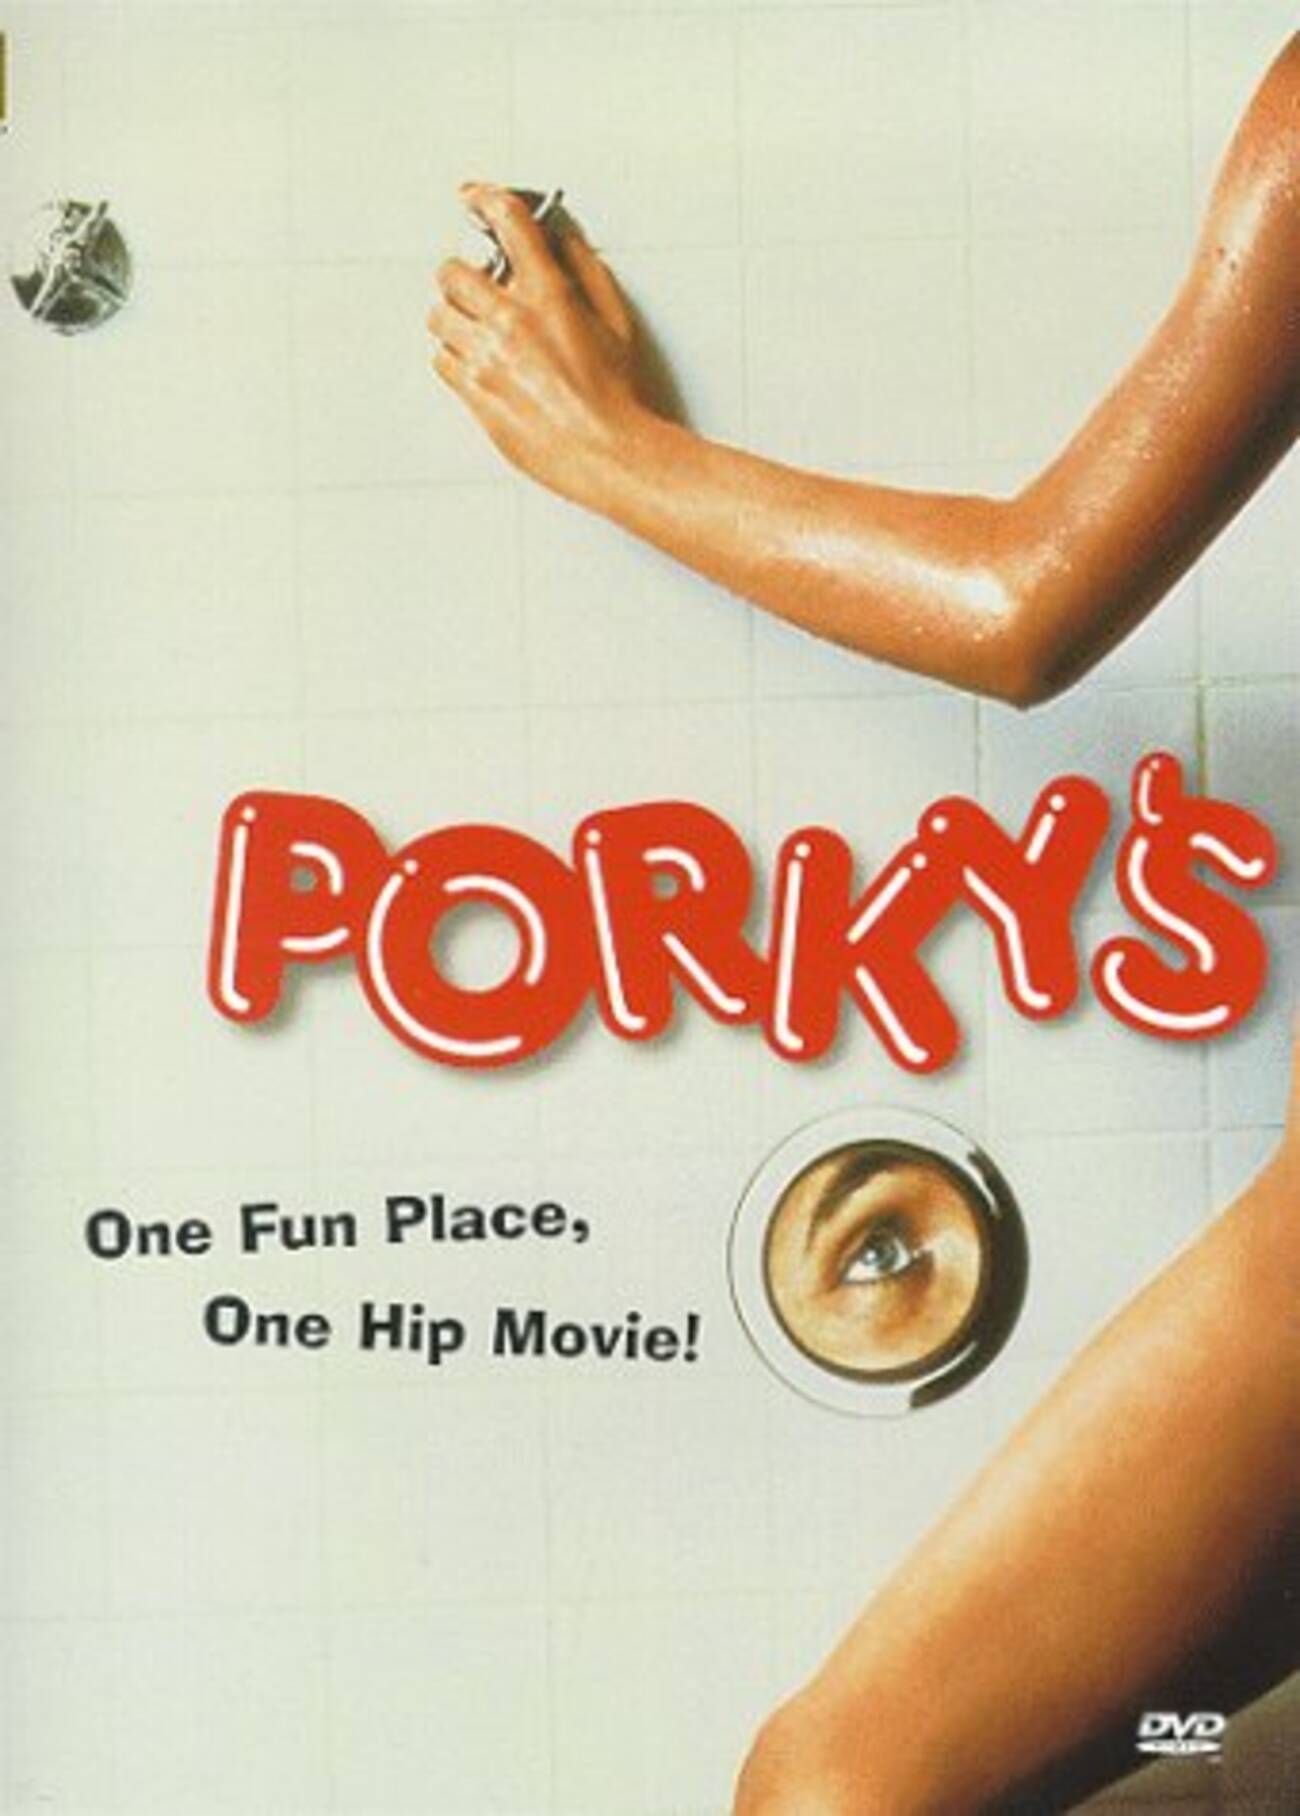 Porkys Showers The Bloor